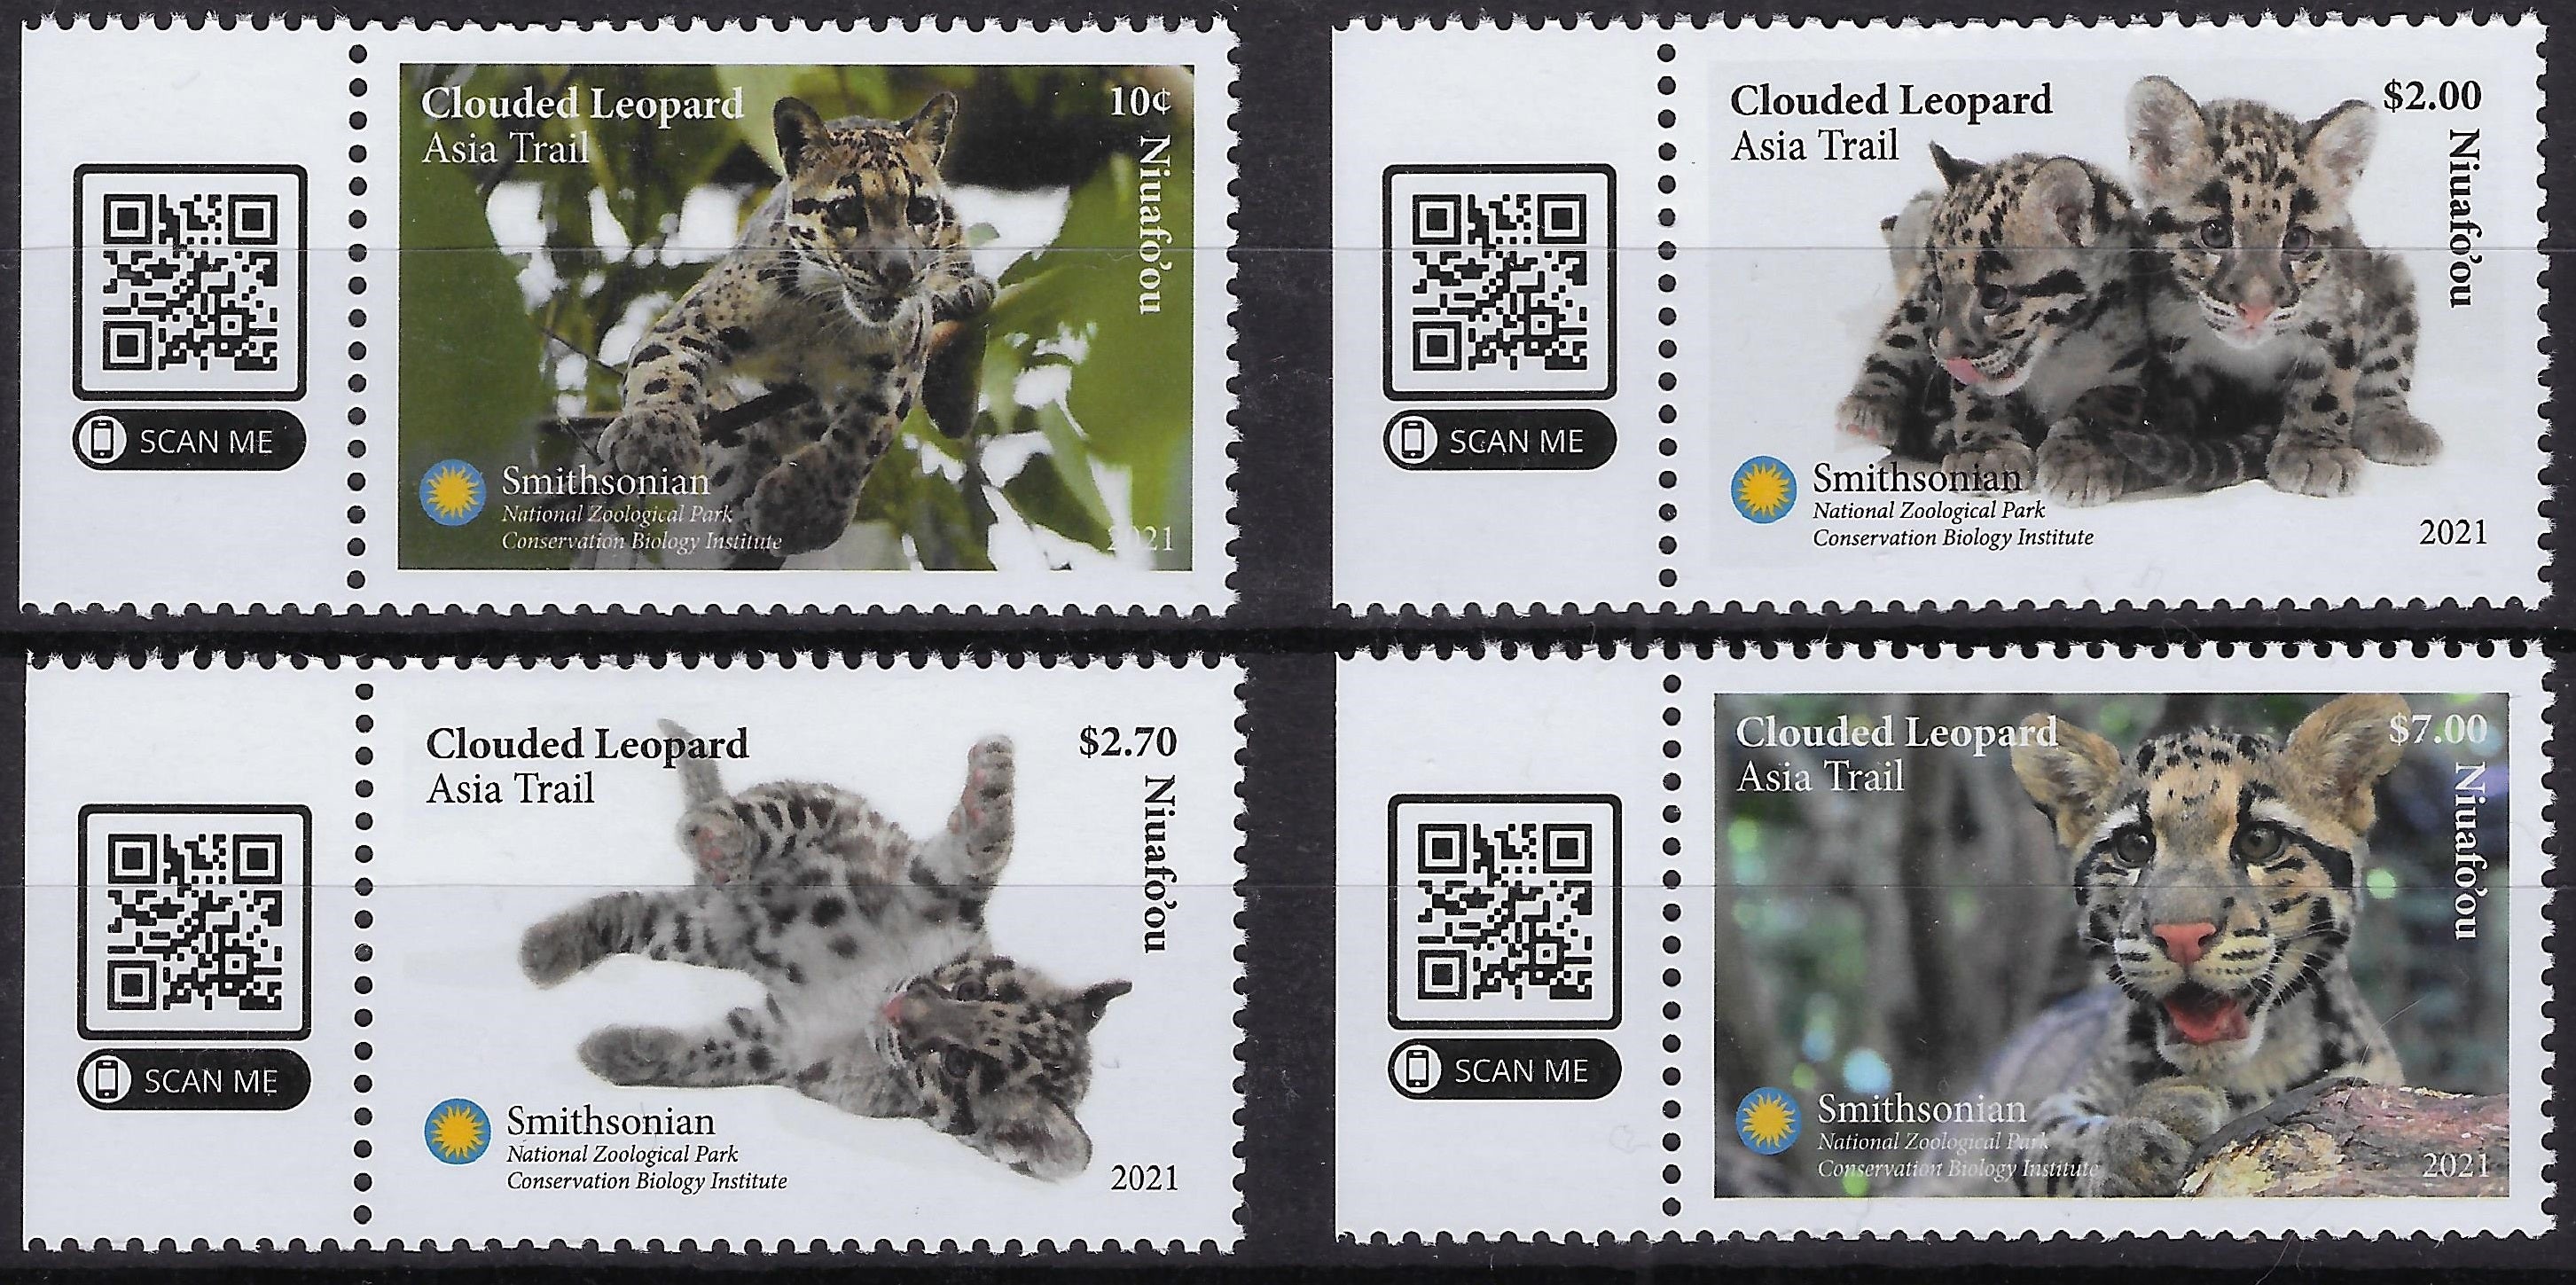 Volume Two - The National Zoo Stamp Collection